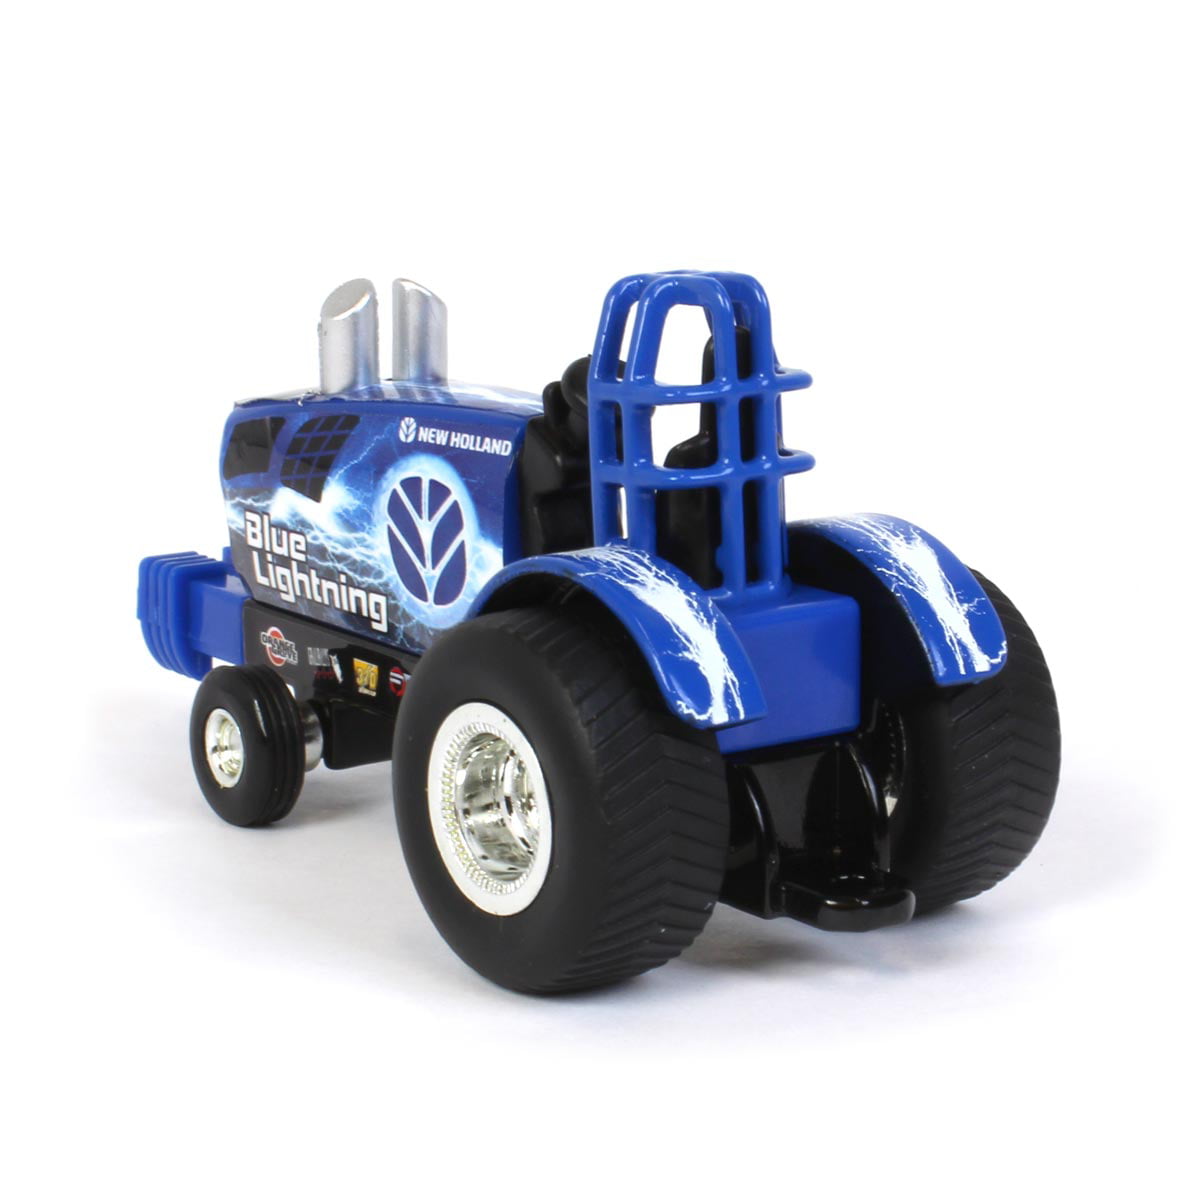 New Holland Pulling Tractor Blue Lighting In 1/64 Scale. 